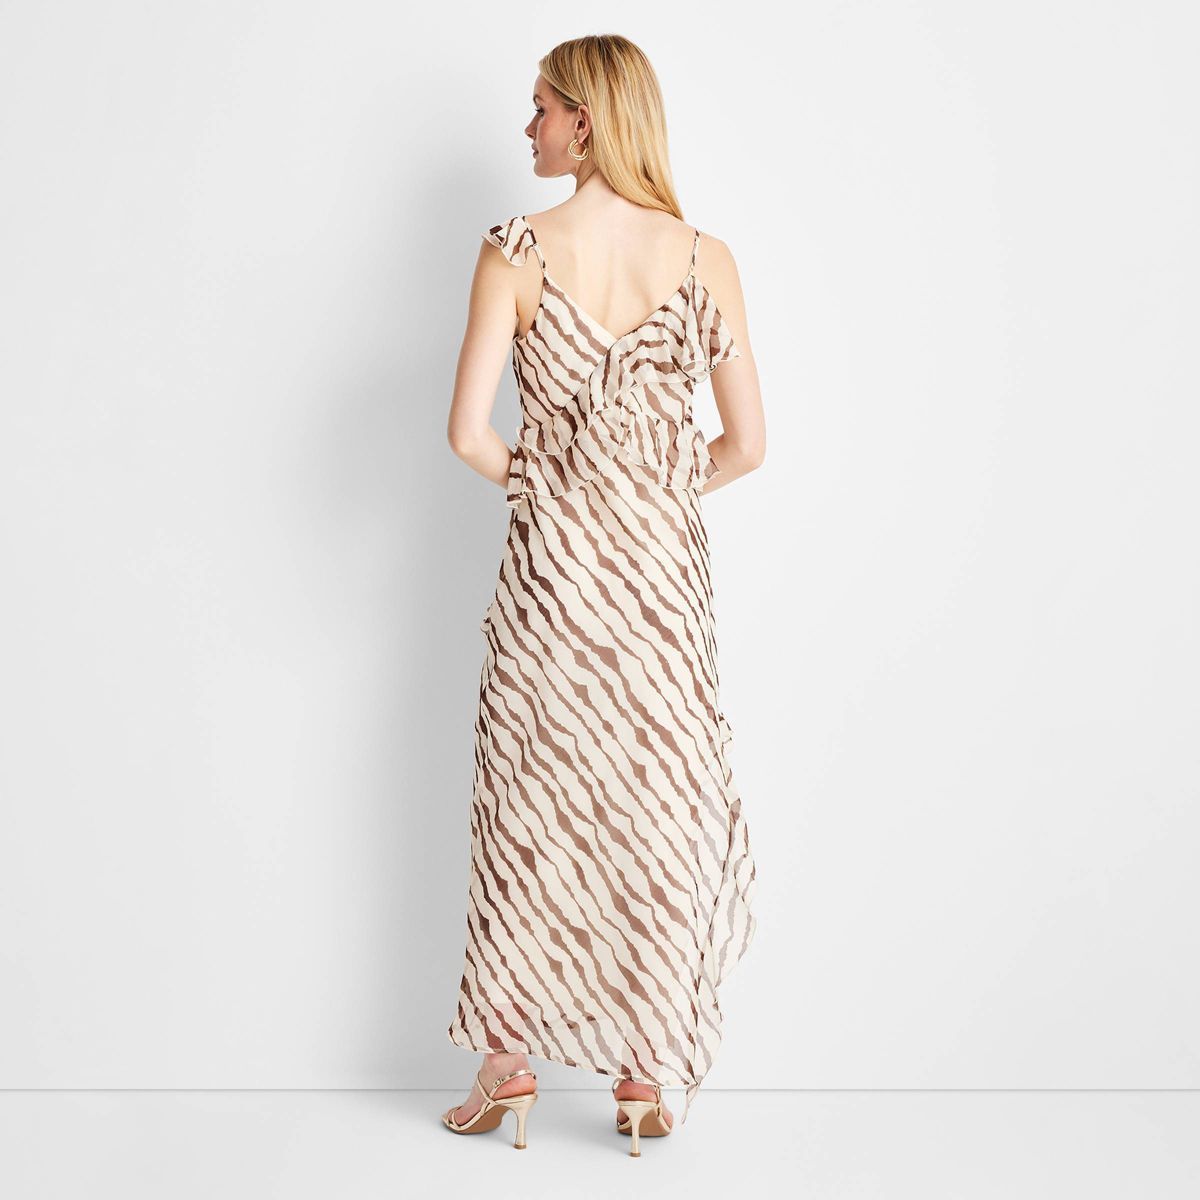 Women's Ruffle Ankle Length Dress - Future Collective™ with Jenee Naylor | Target